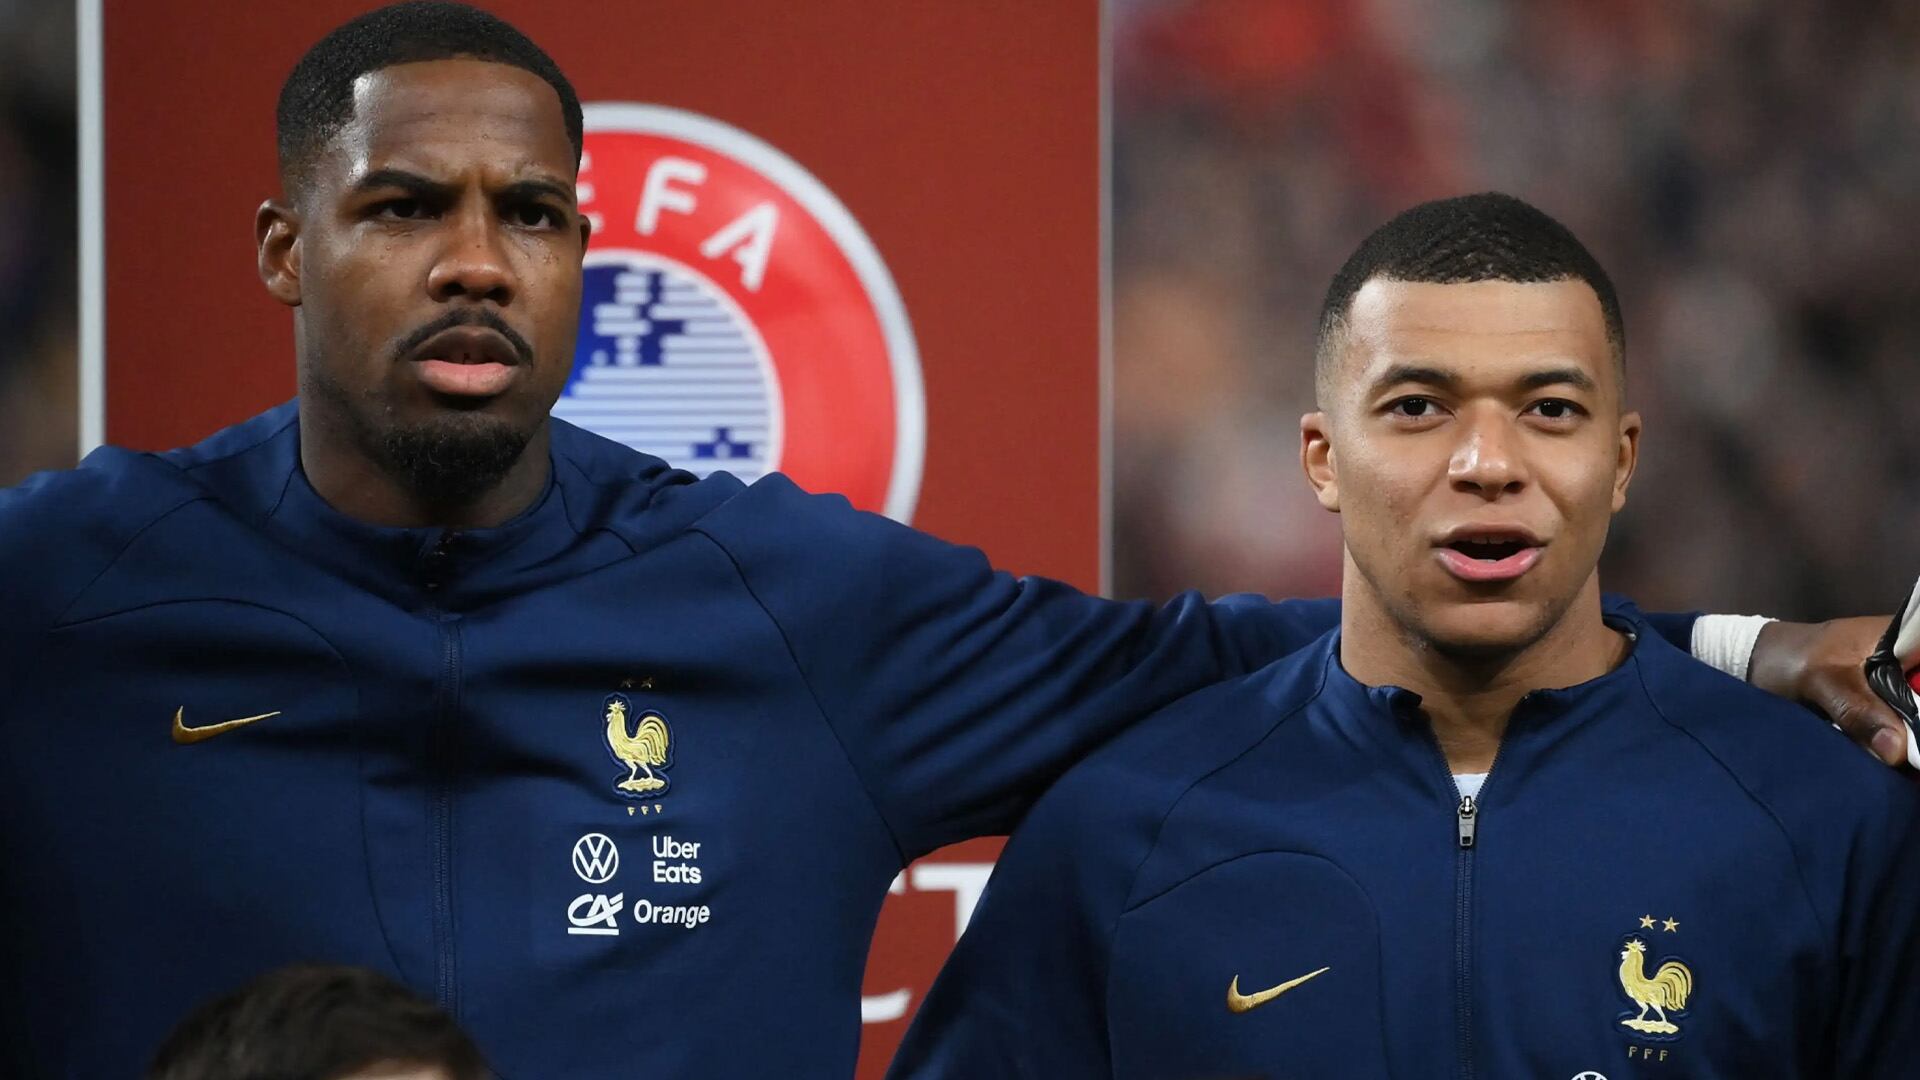 Painful situation, Kylian Mbappé supports his teammate after suffering racism